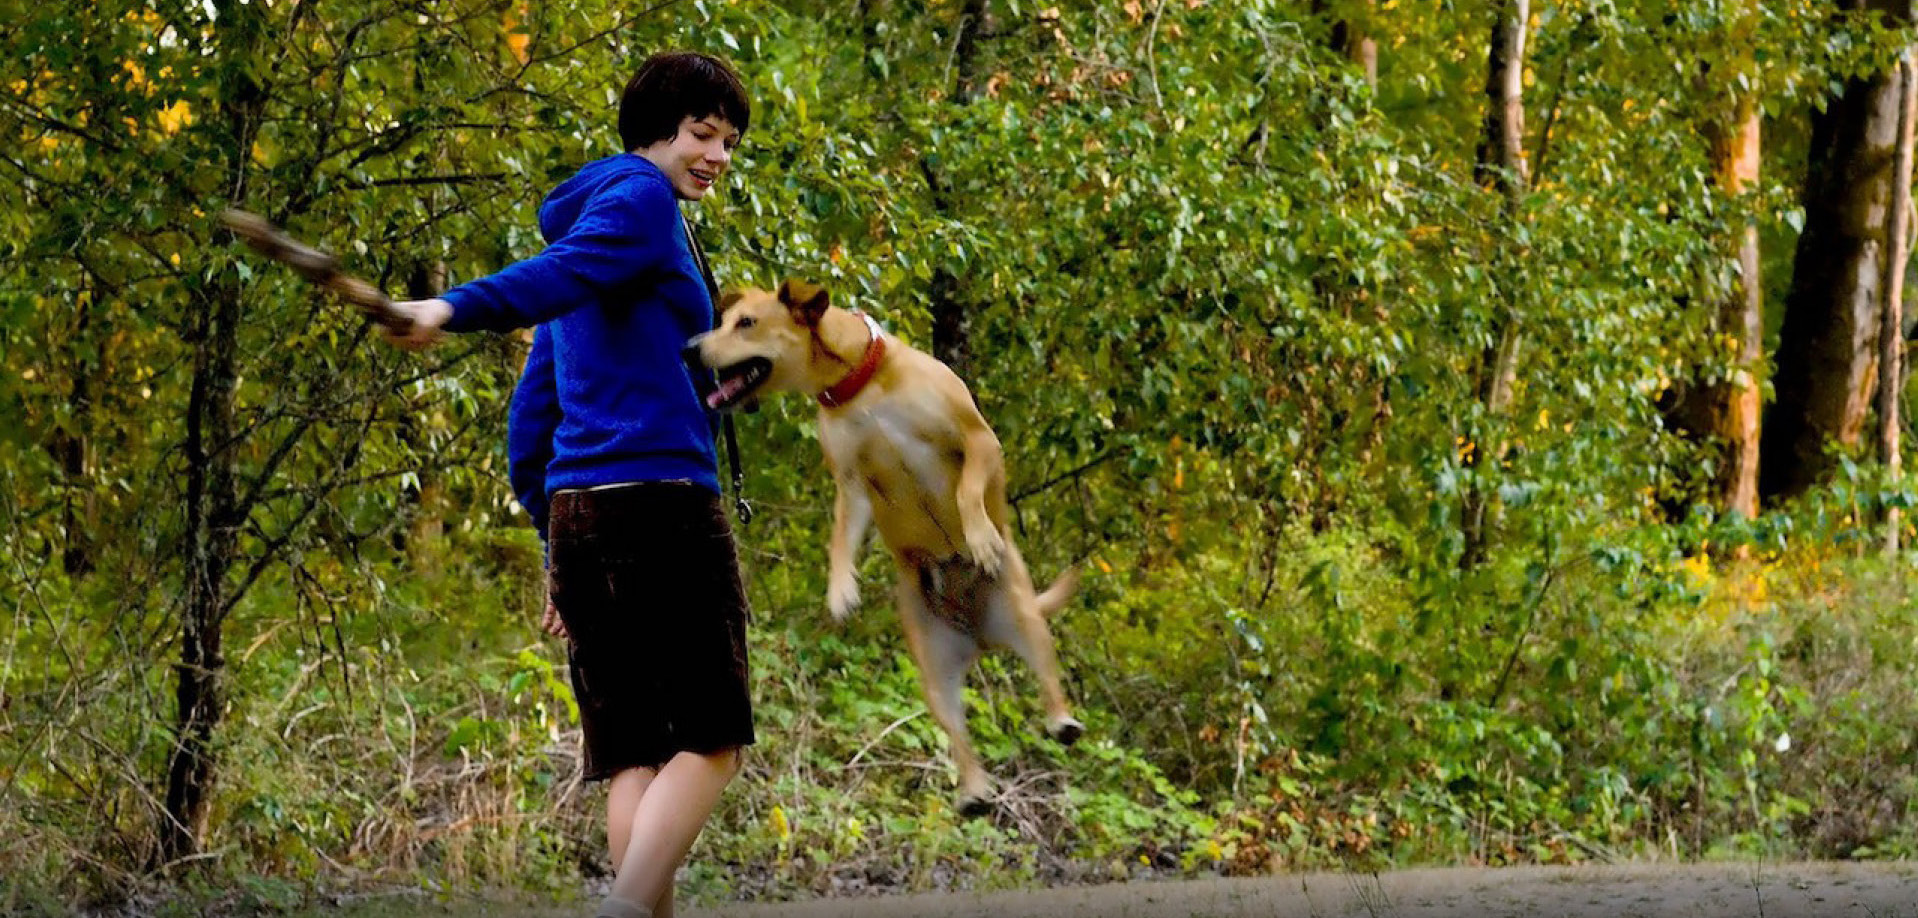 A young white woman stands in a green, grassy forest area. She has short dark hair and is wearing long, dark shorts and a dark blue hoodie. She's accompanied by a yellow mixed-breed dog. She's playing with the dog, pulling a large stick away from the animal as it reaches for the stick with its mouth.